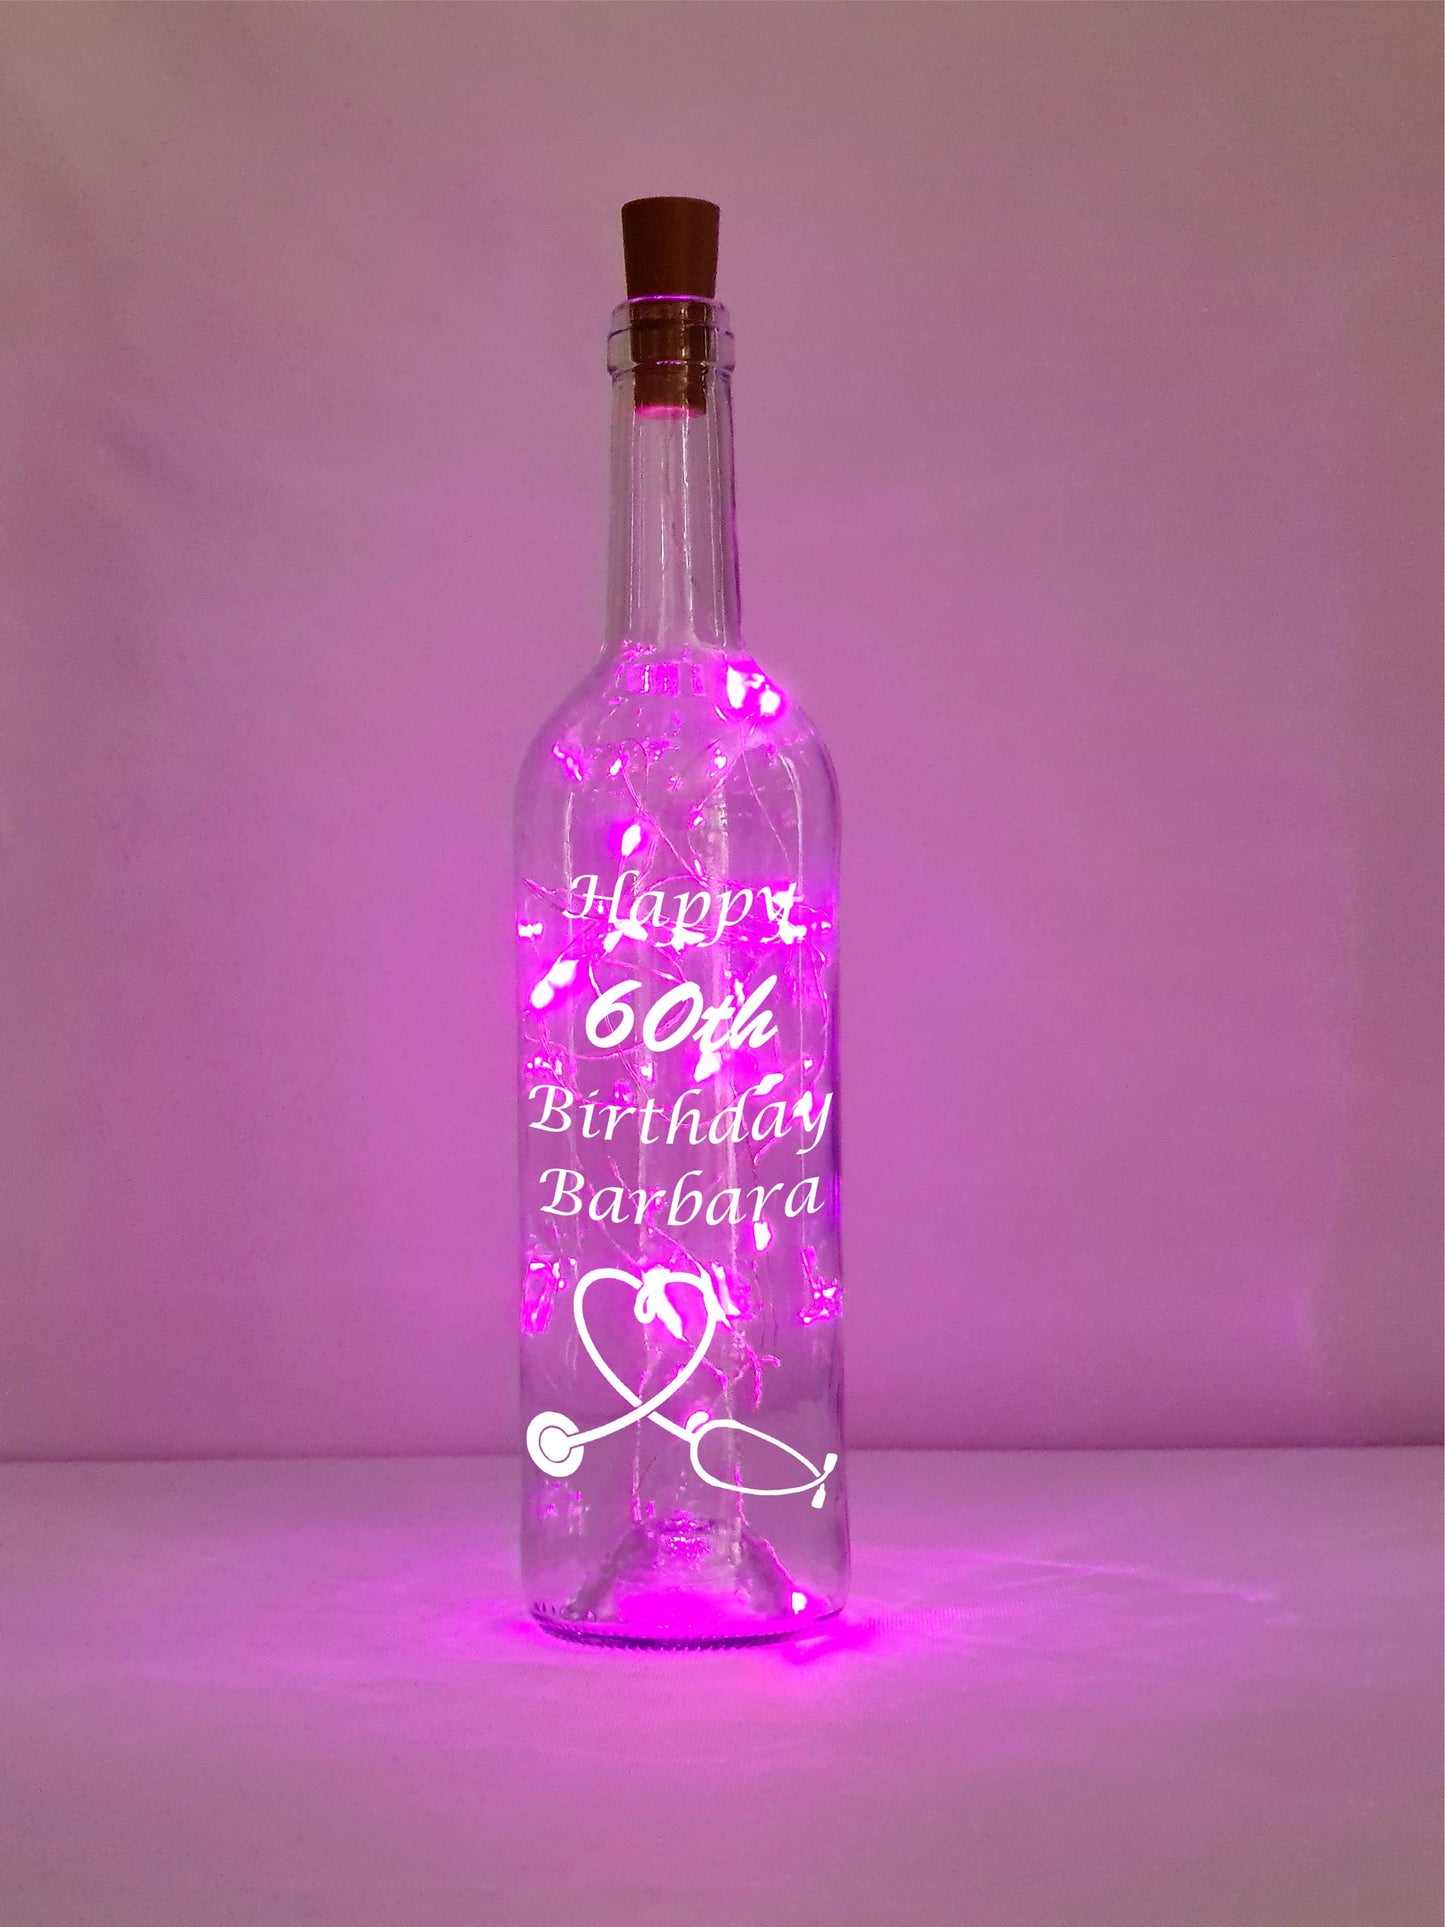 Personalised 60th Birthday Gift For Nurse, Light Up Wine Bottle, Engraved Happy Birthday, Mums Gift, Best Friend Gift, Present For Her